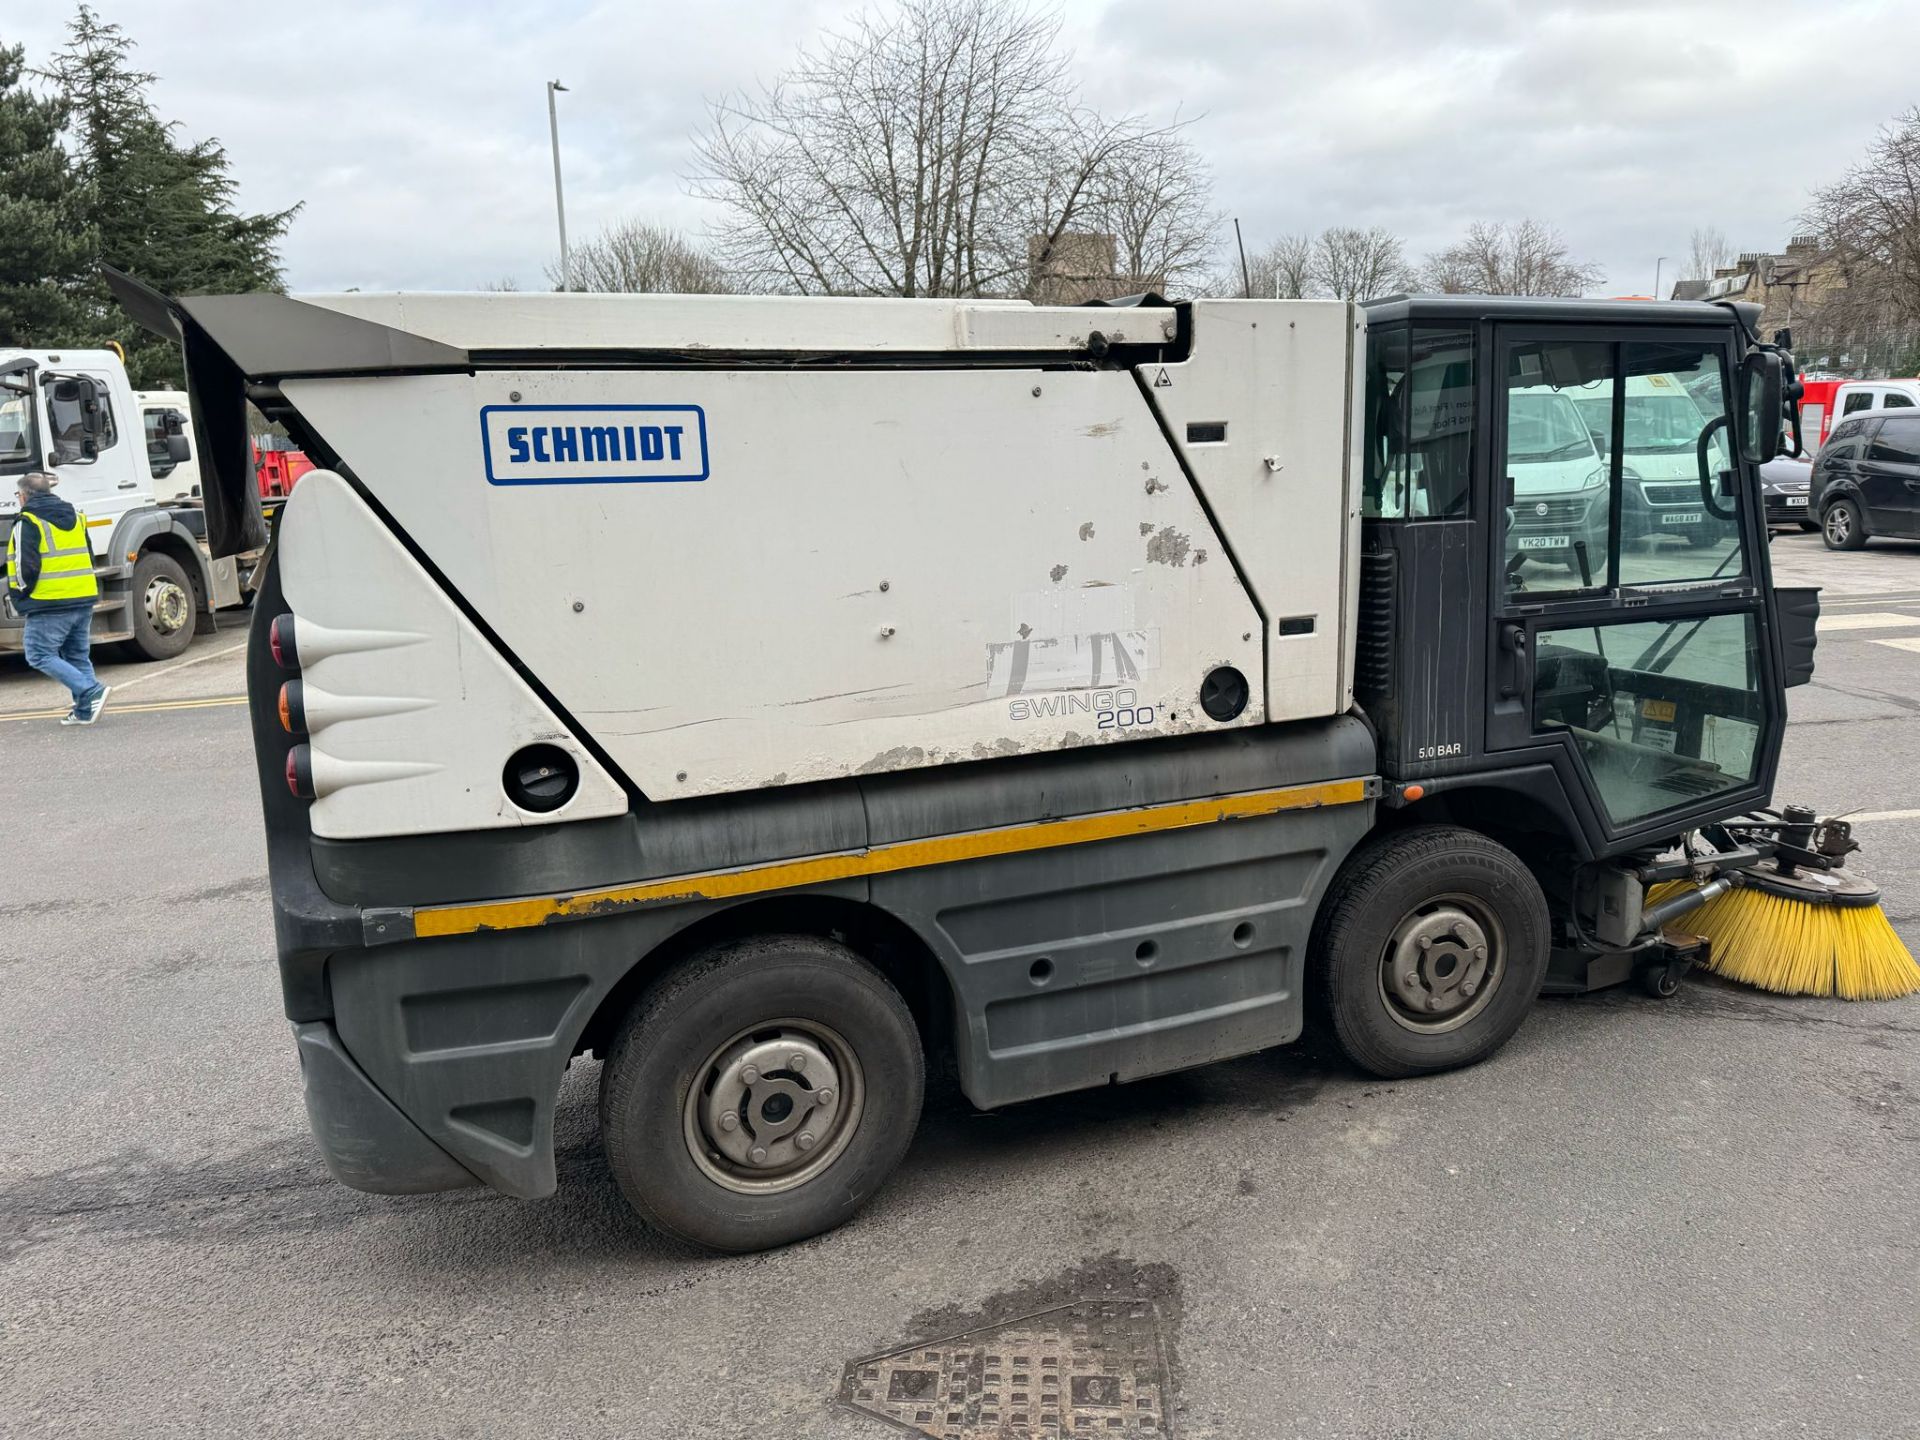 2017, SCHMIDT - Compact Road Sweeper (Ex-Council fleet owned and maintained) - Image 7 of 32